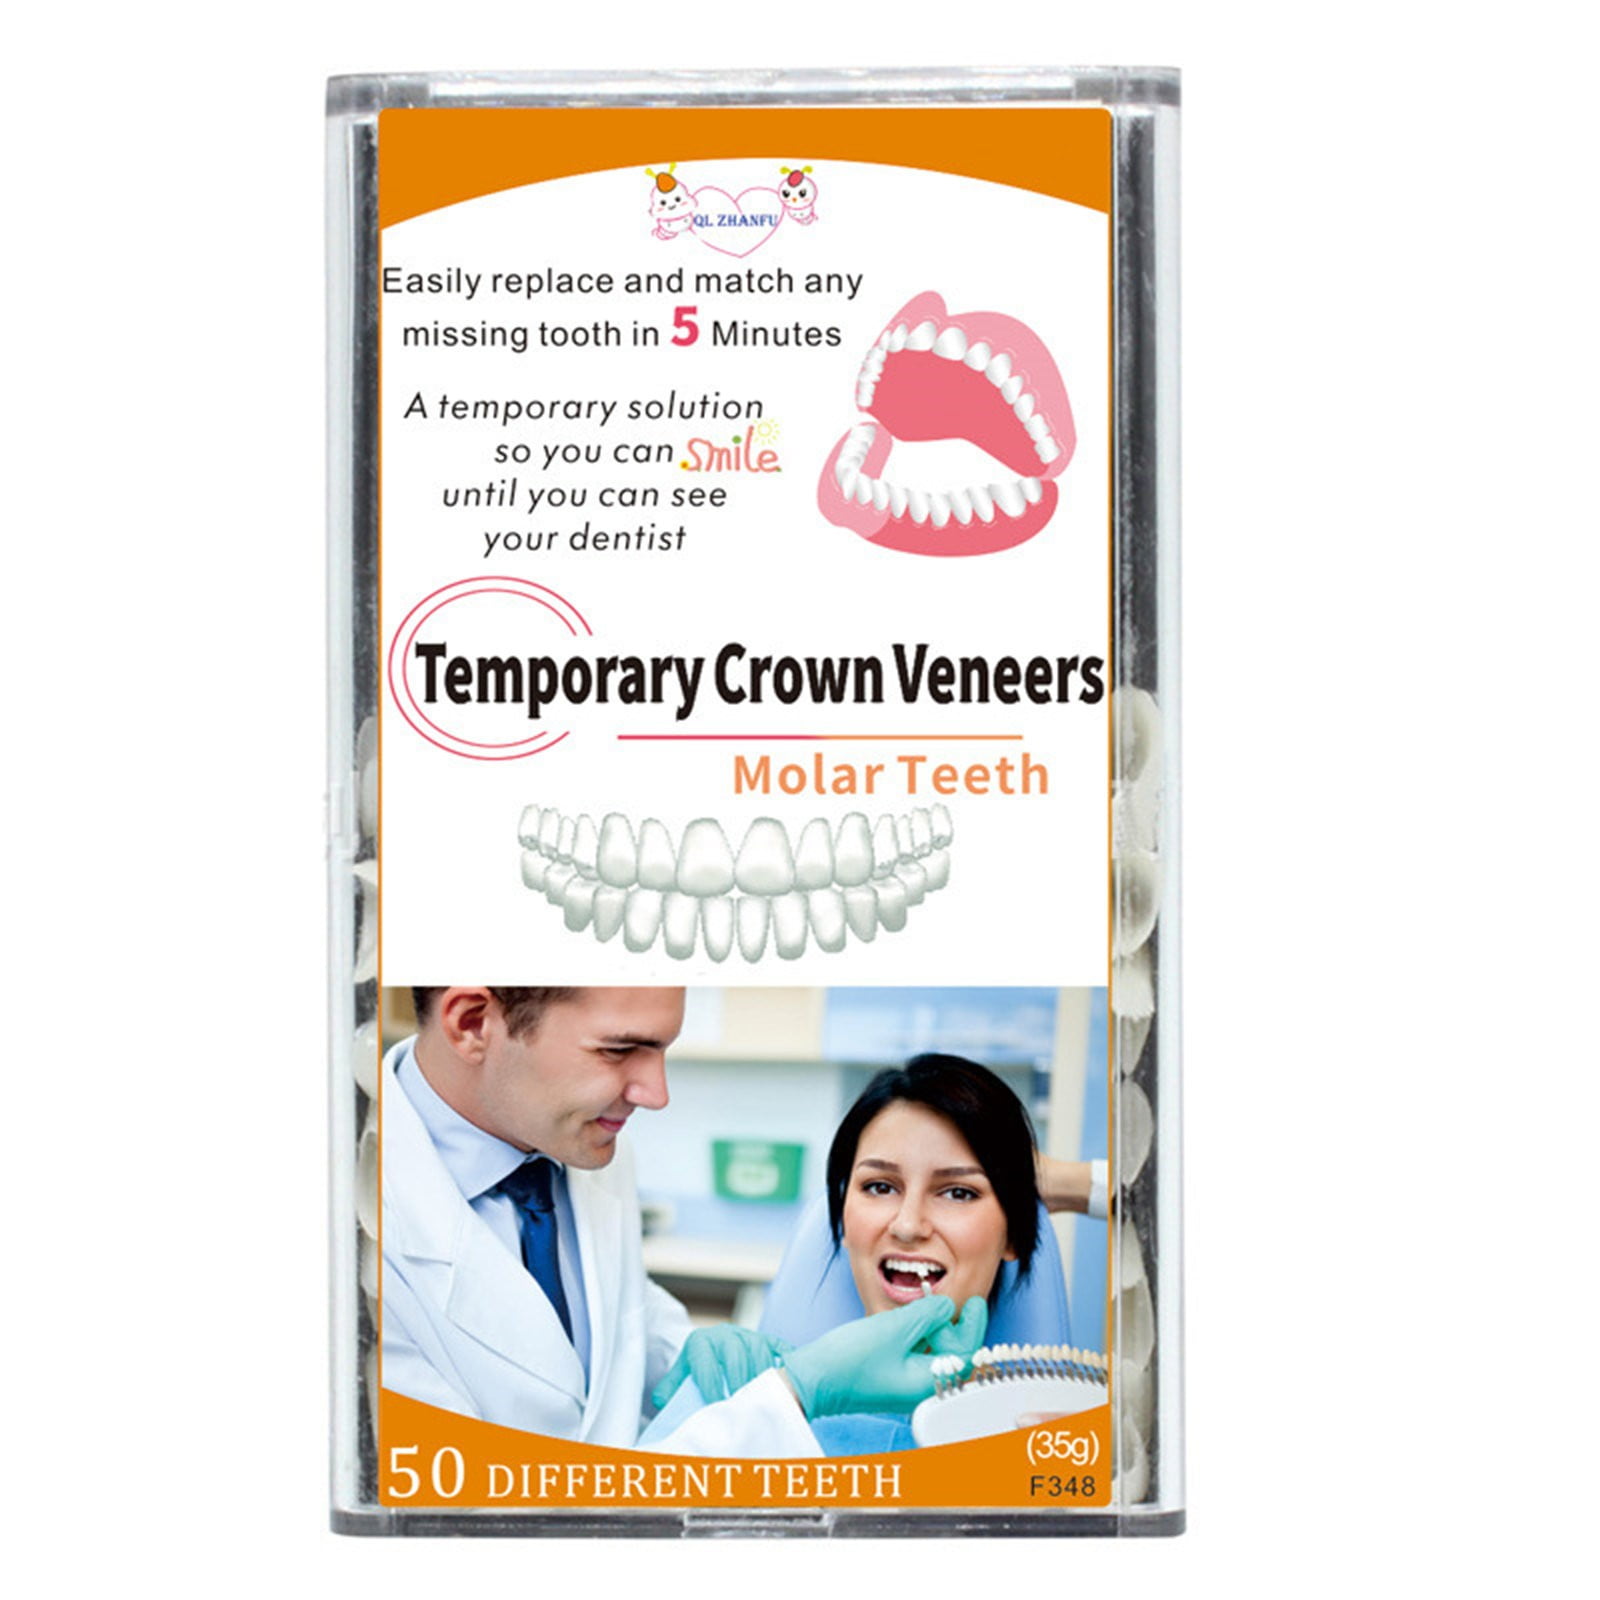 MIARHB Temporary Tooth Kit For Filling The Missing Broken Tooth And Gaps Moldable Temporary Crown Veneers Material Anterior Front Back Molar Teeth Swish Smile